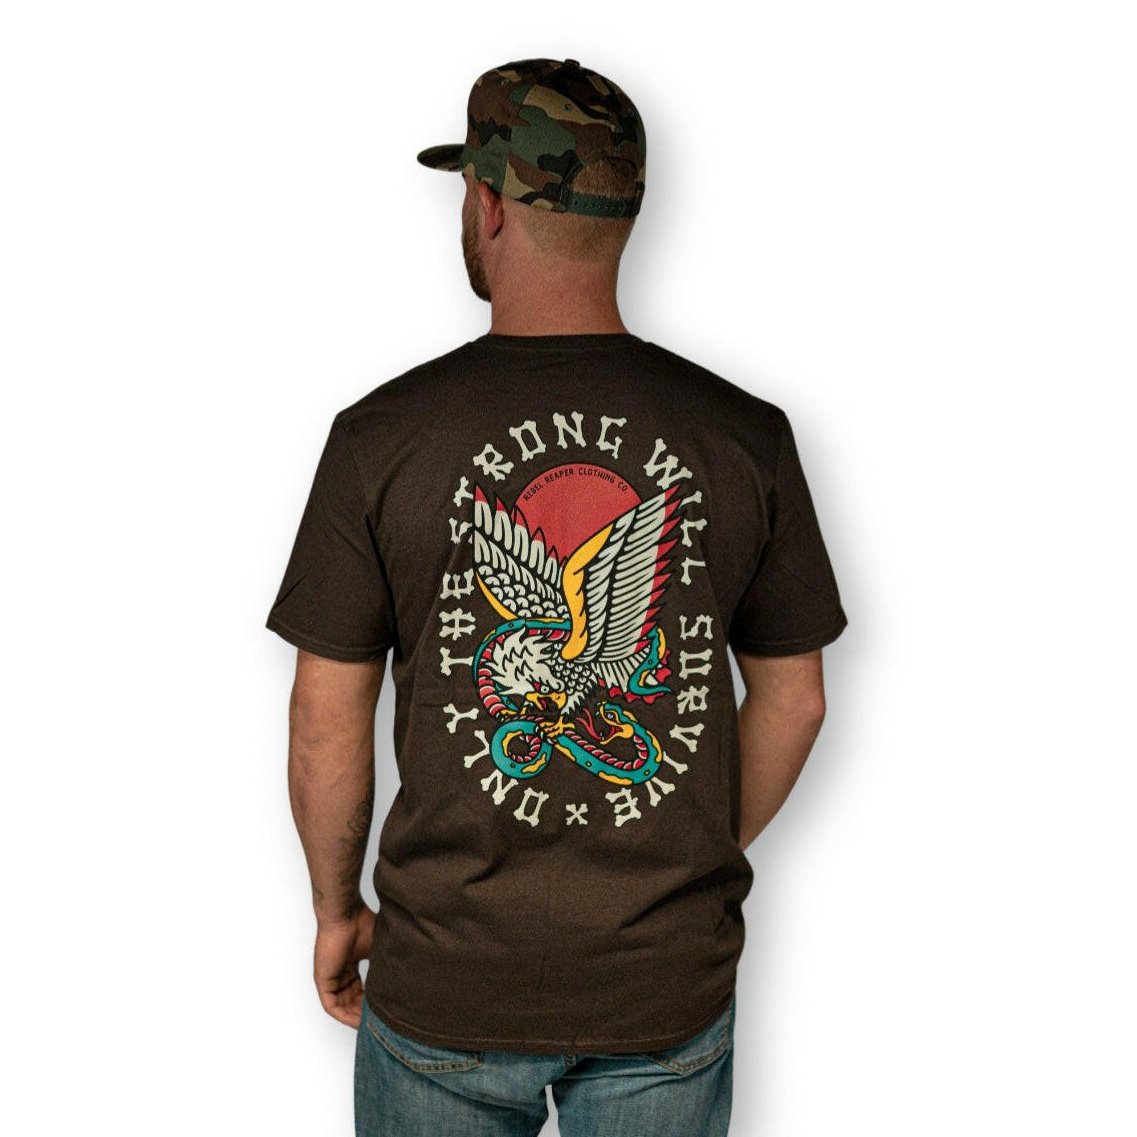 Only the Strong Survive Brown T-Shirt - Rebel Reaper Clothing Company T-Shirt